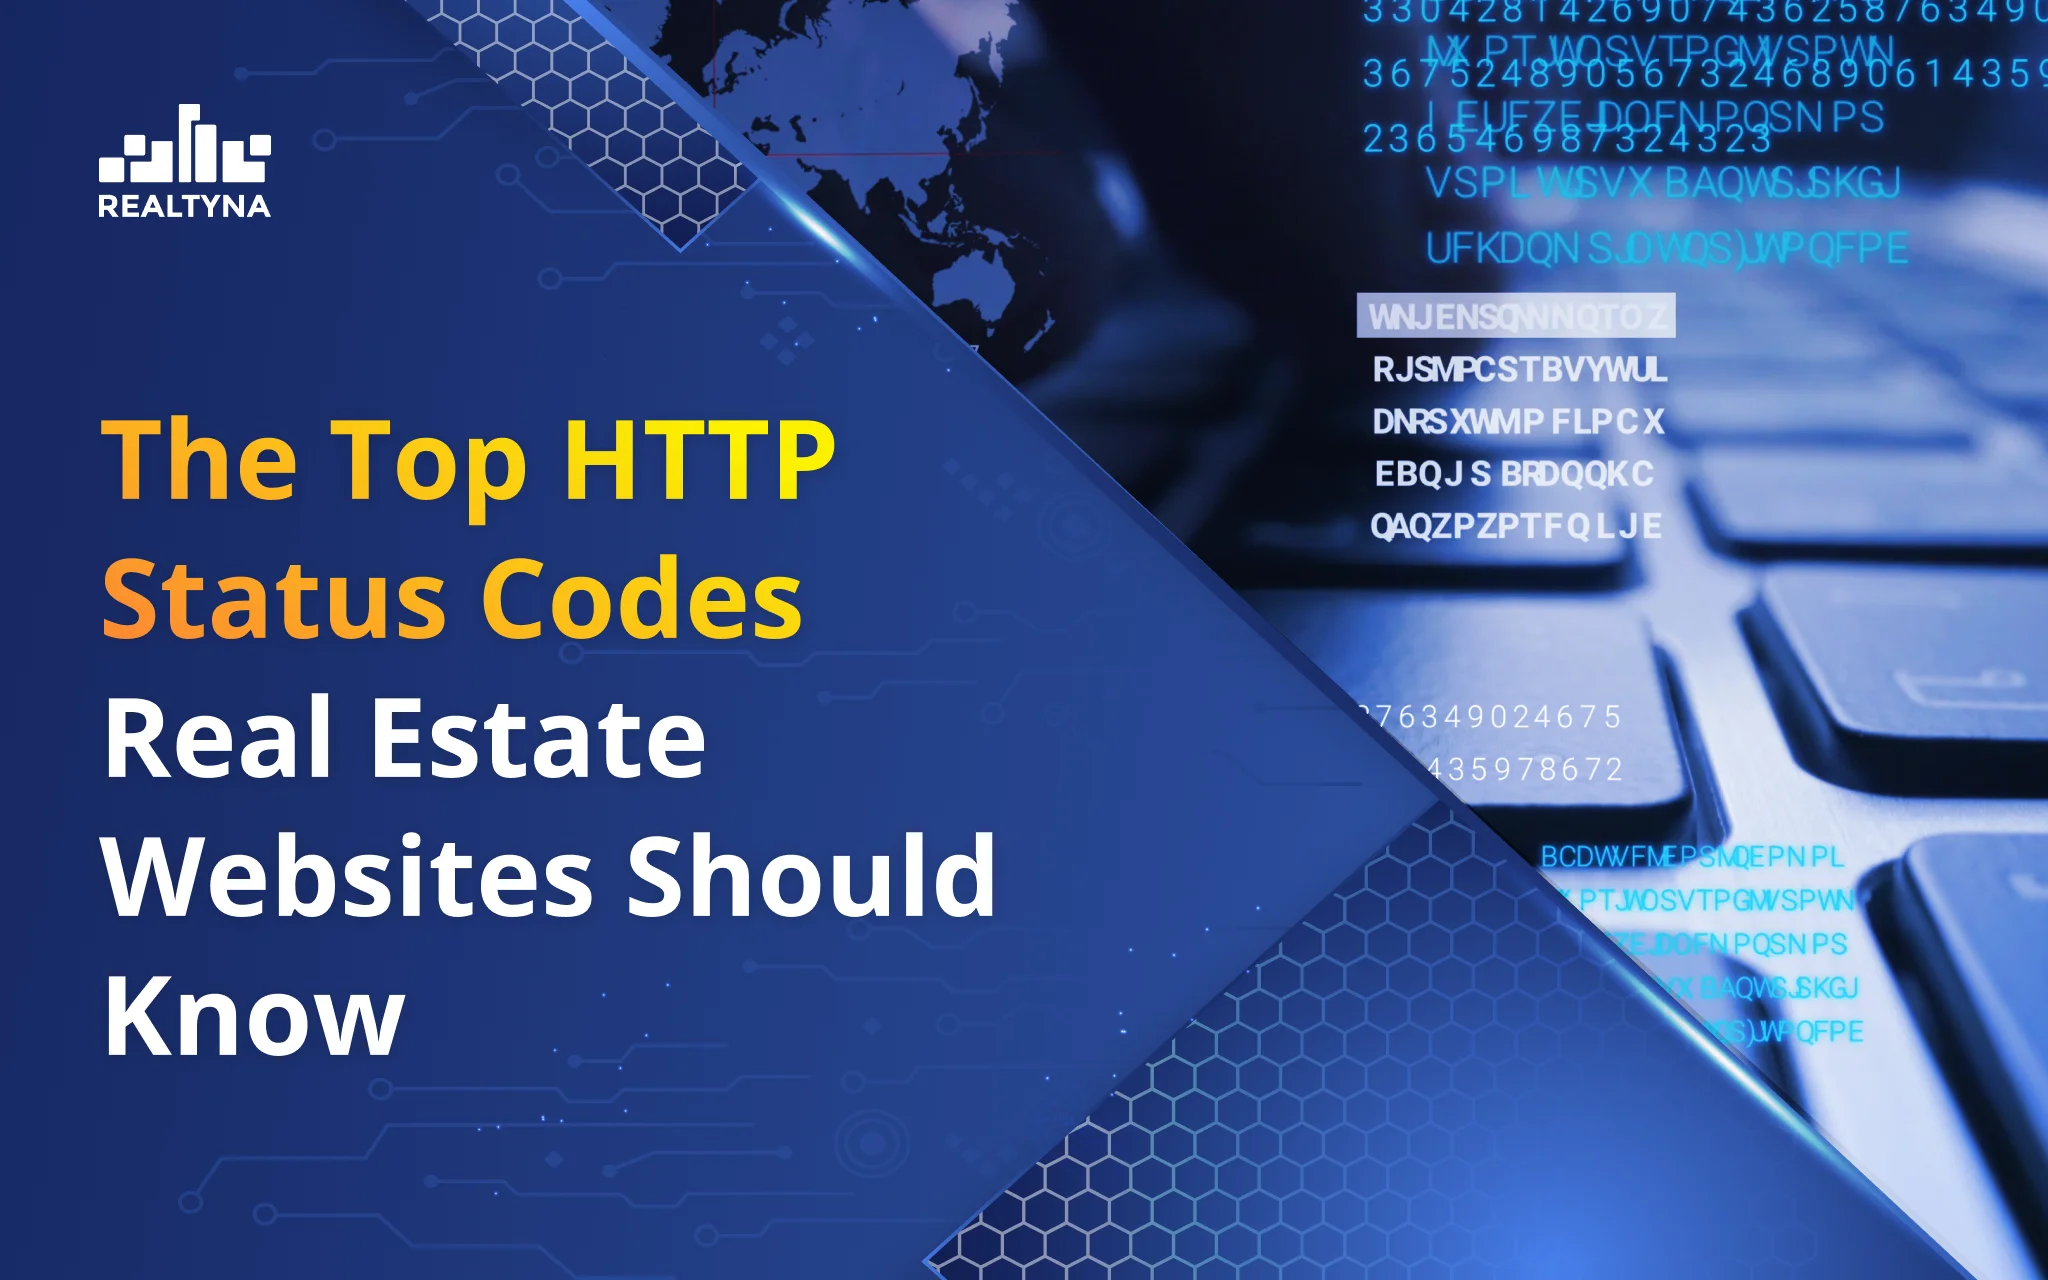 The Top HTTP Status Codes Real Estate Websites Should Know